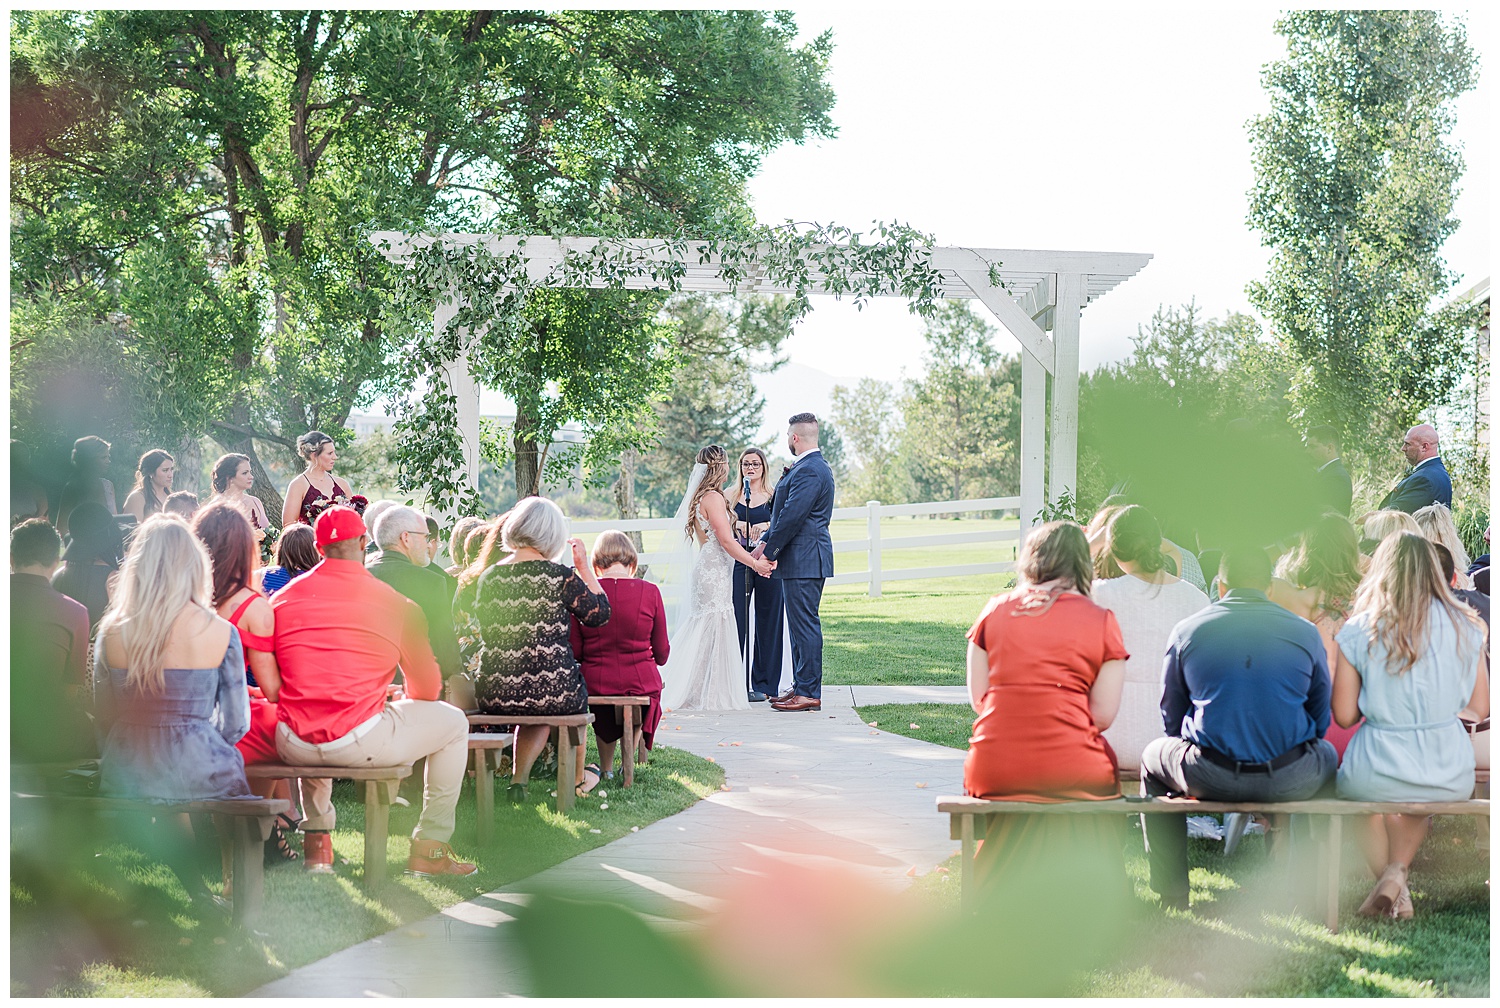 Couple exchange vows outside under an arch outside surrounded by friends and family after planning a wedding for a full year.